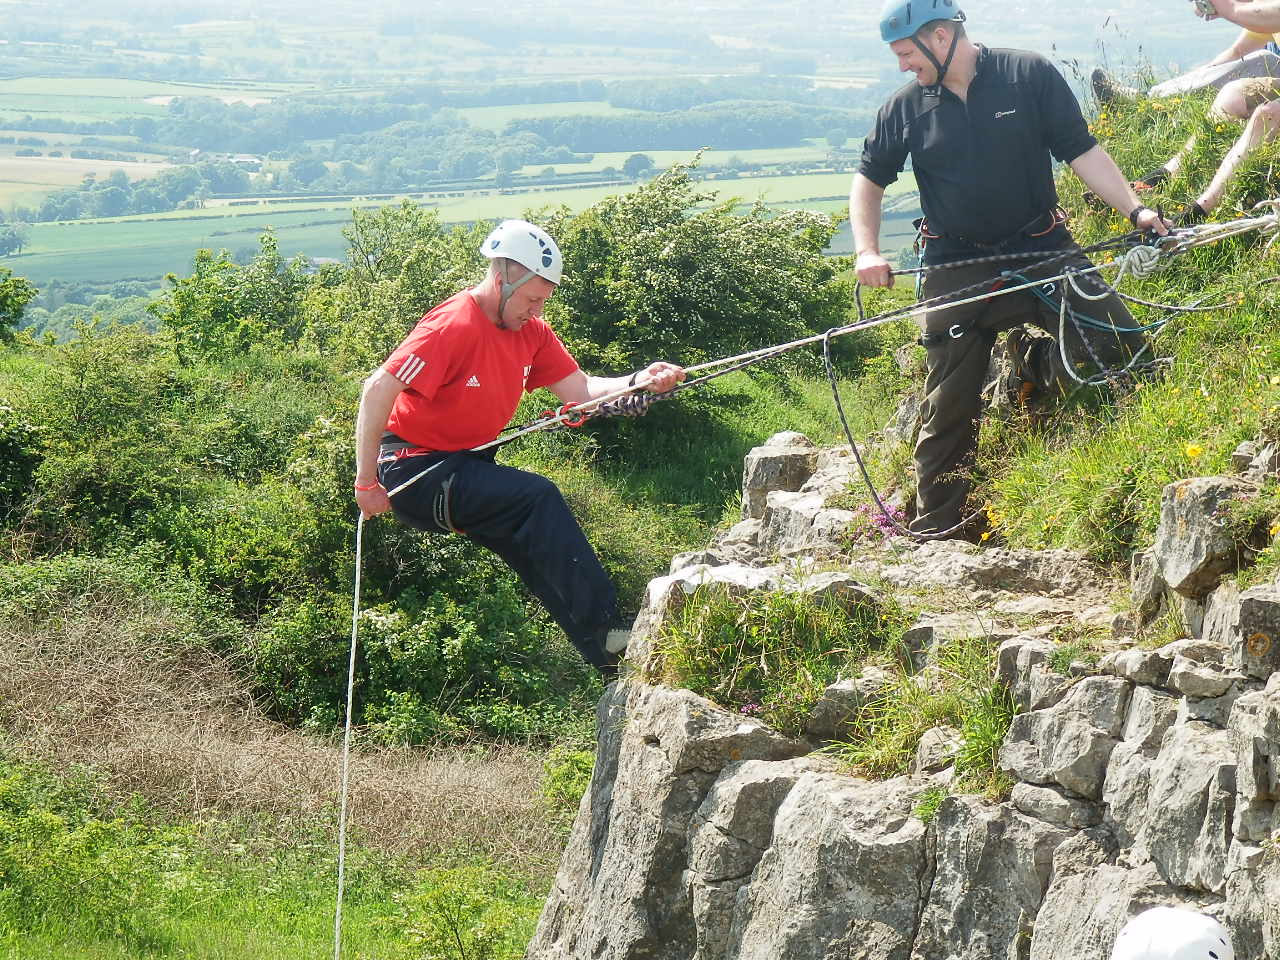 Abseil and climbing sessions